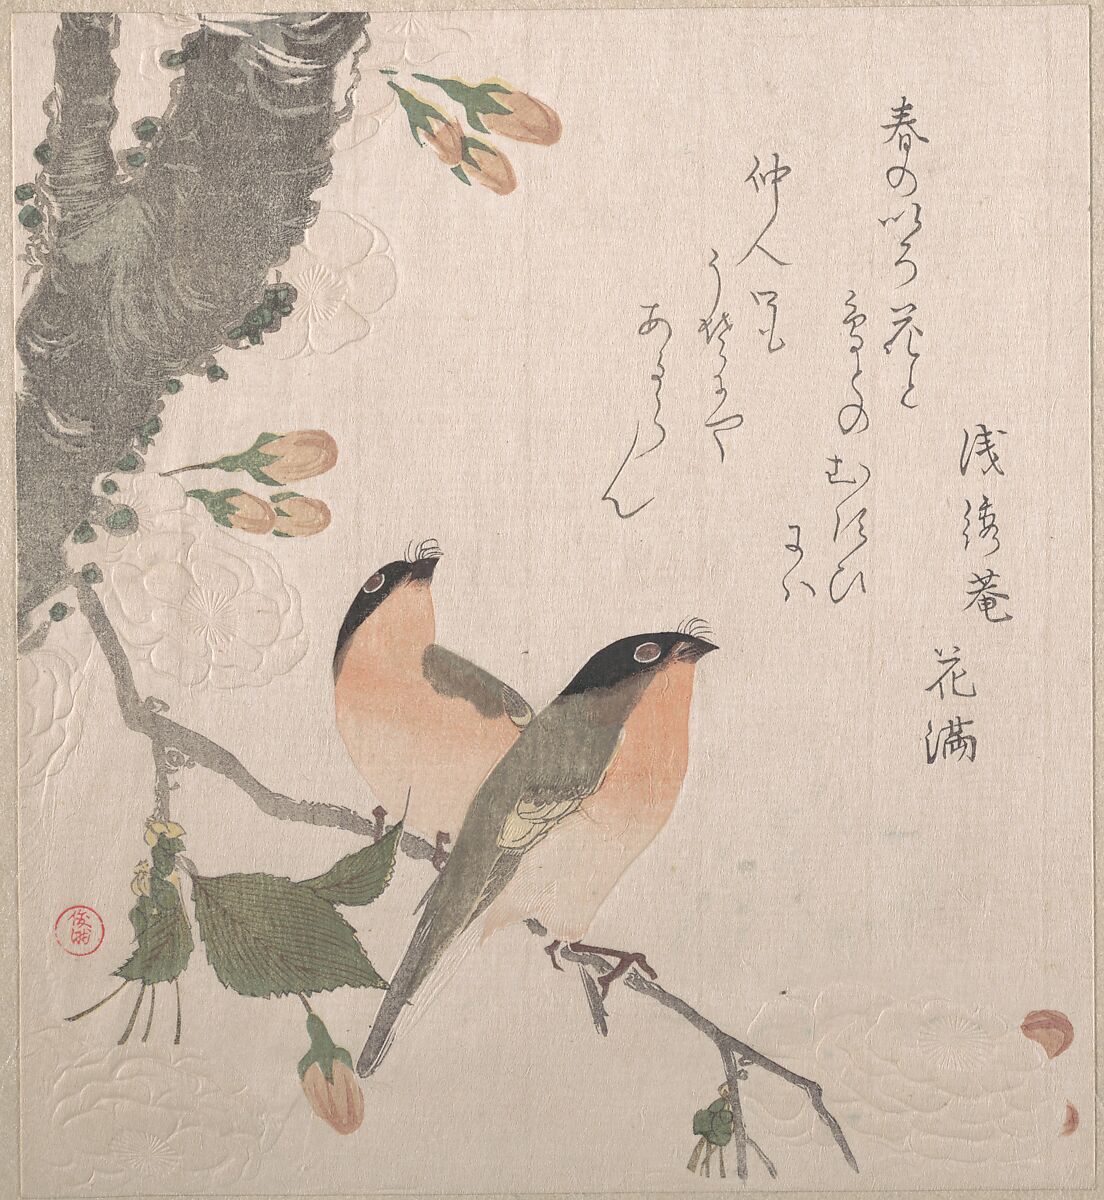 Bullfinches and Cherry Blossoms, Kubo Shunman (Japanese, 1757–1820) (?), Part of an album of woodblock prints (surimono); ink and color on paper, Japan 